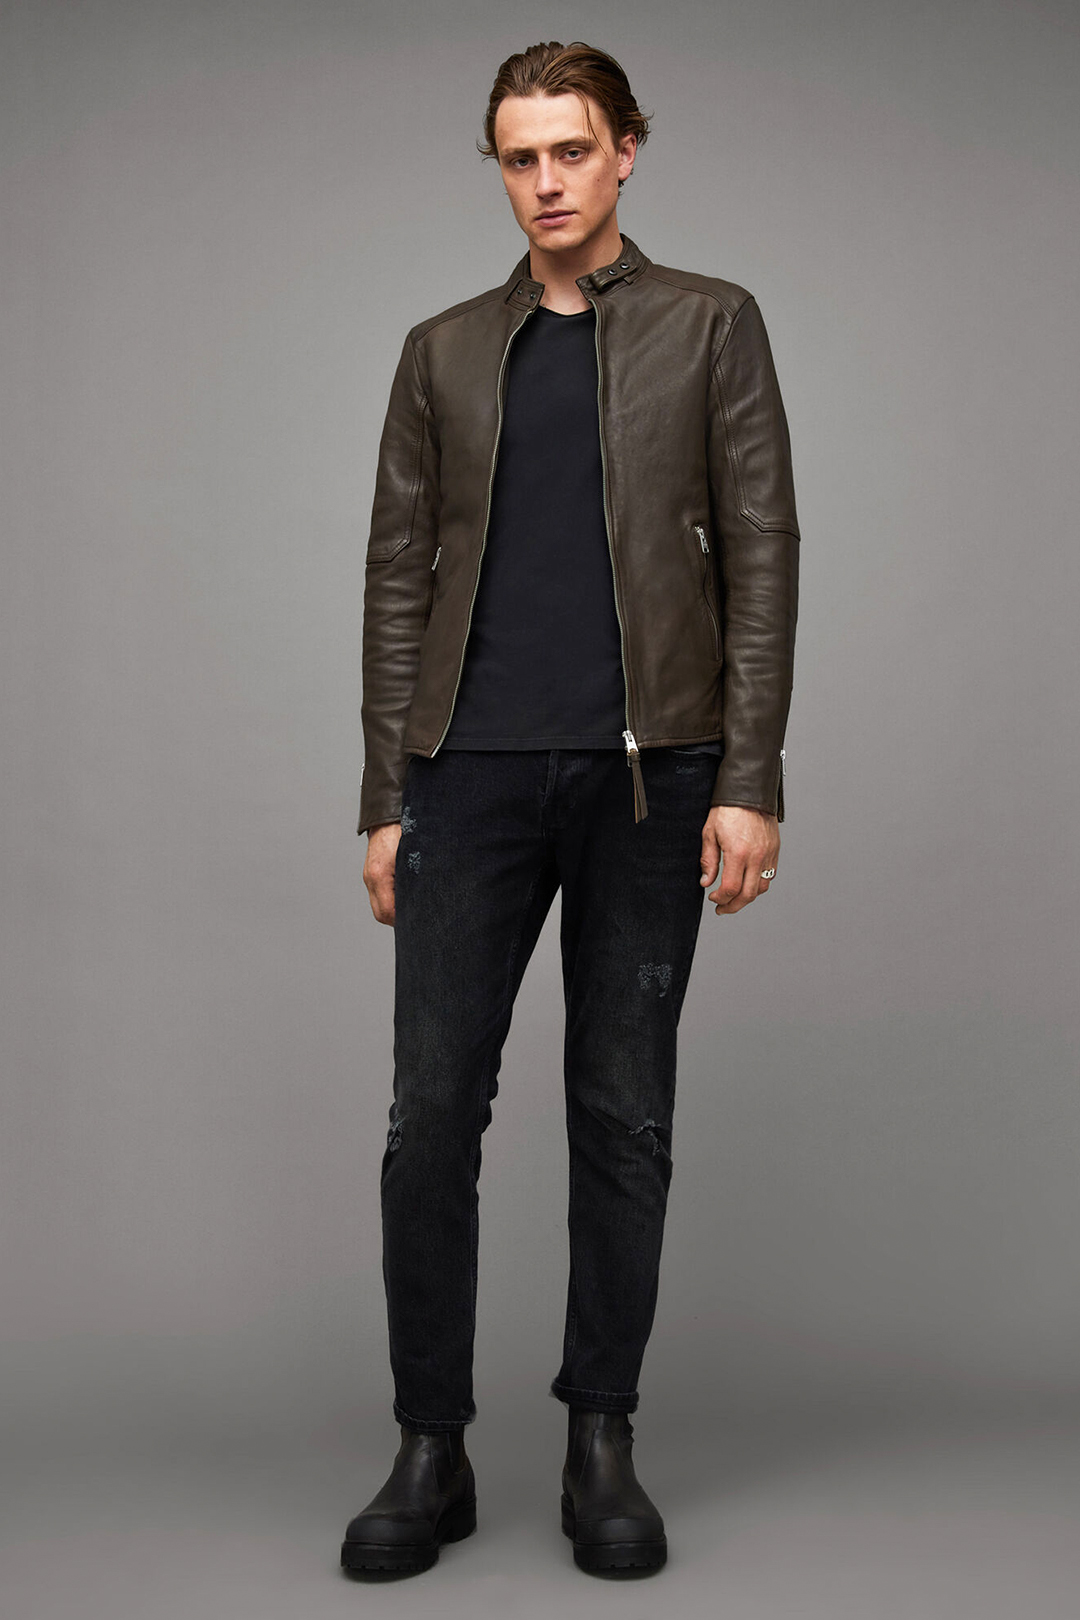 Cafe racer brown jacket, washed black t-shirt, black jeans, and black leather Chelsea boots outfit